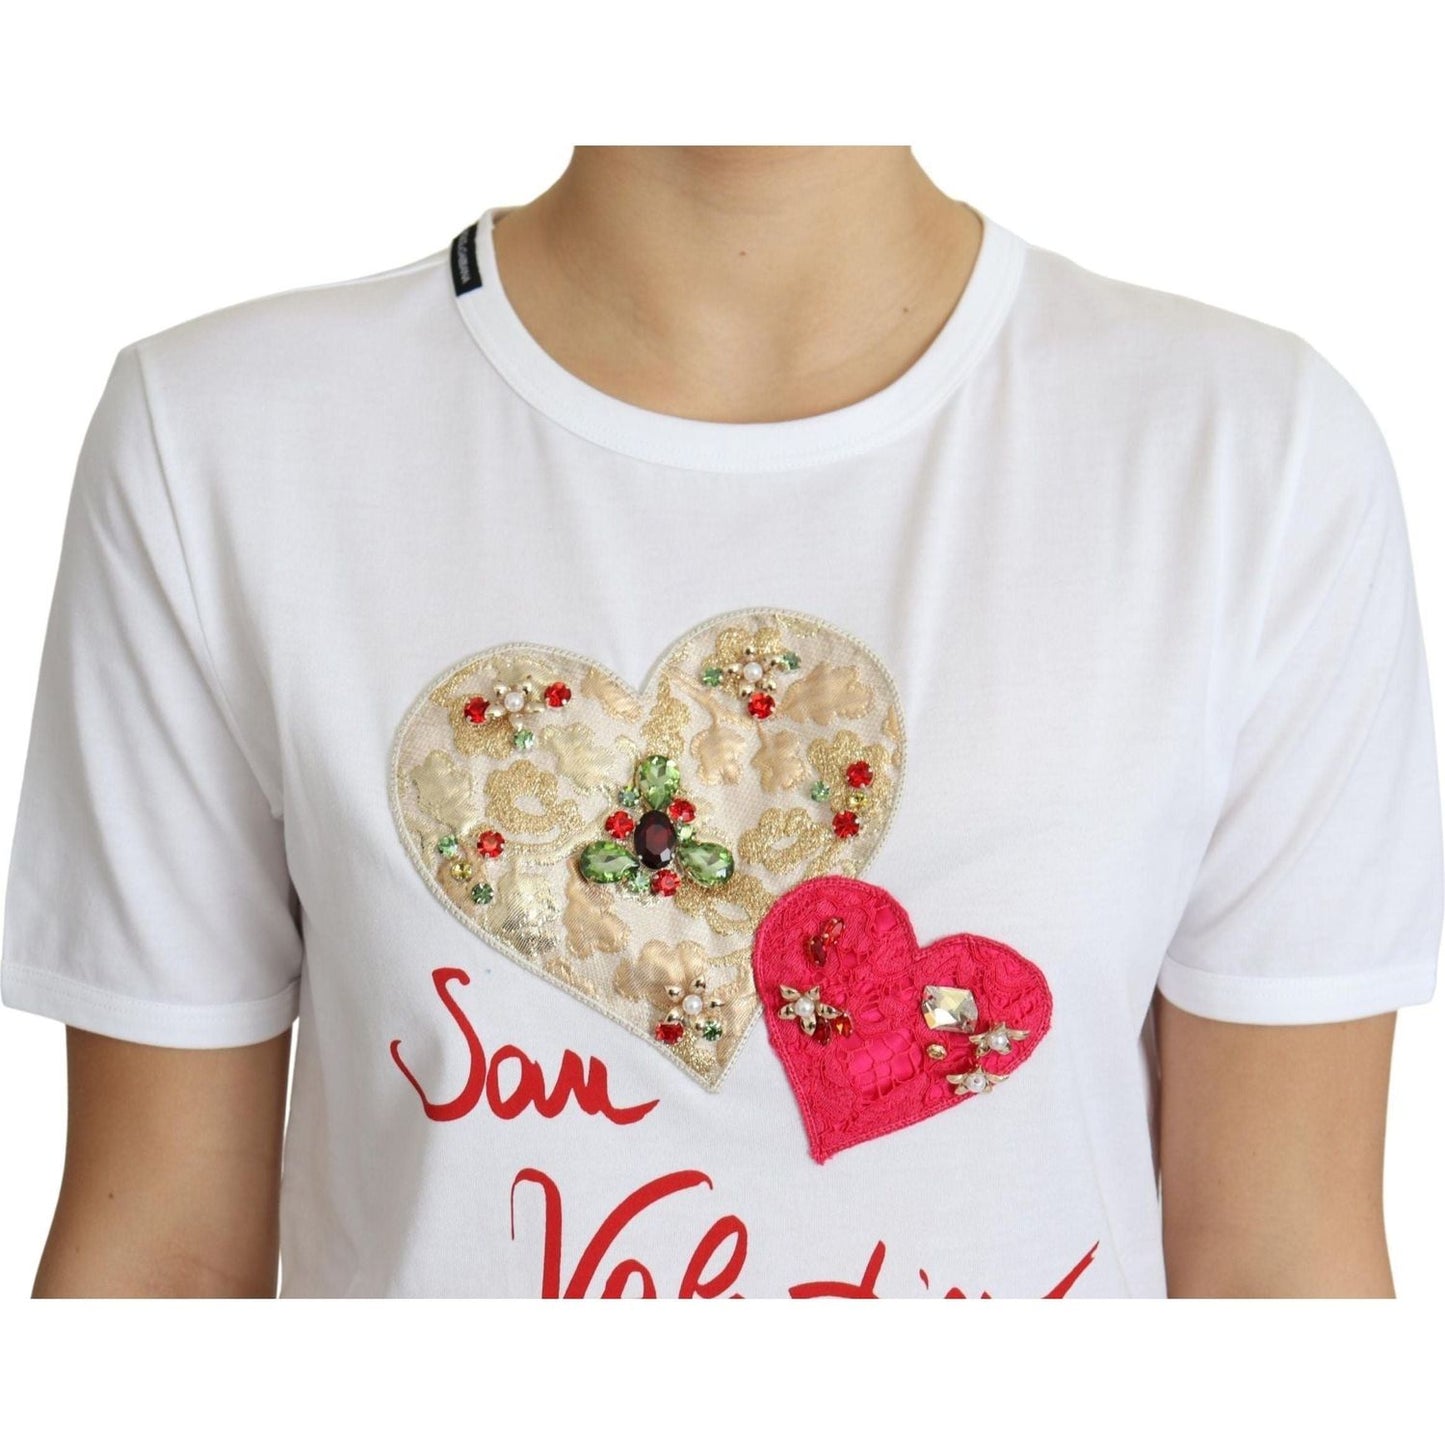 Dolce & Gabbana Crystal-Embellished White Cotton Tee white-san-valentino-heart-crystals-t-shirt-top